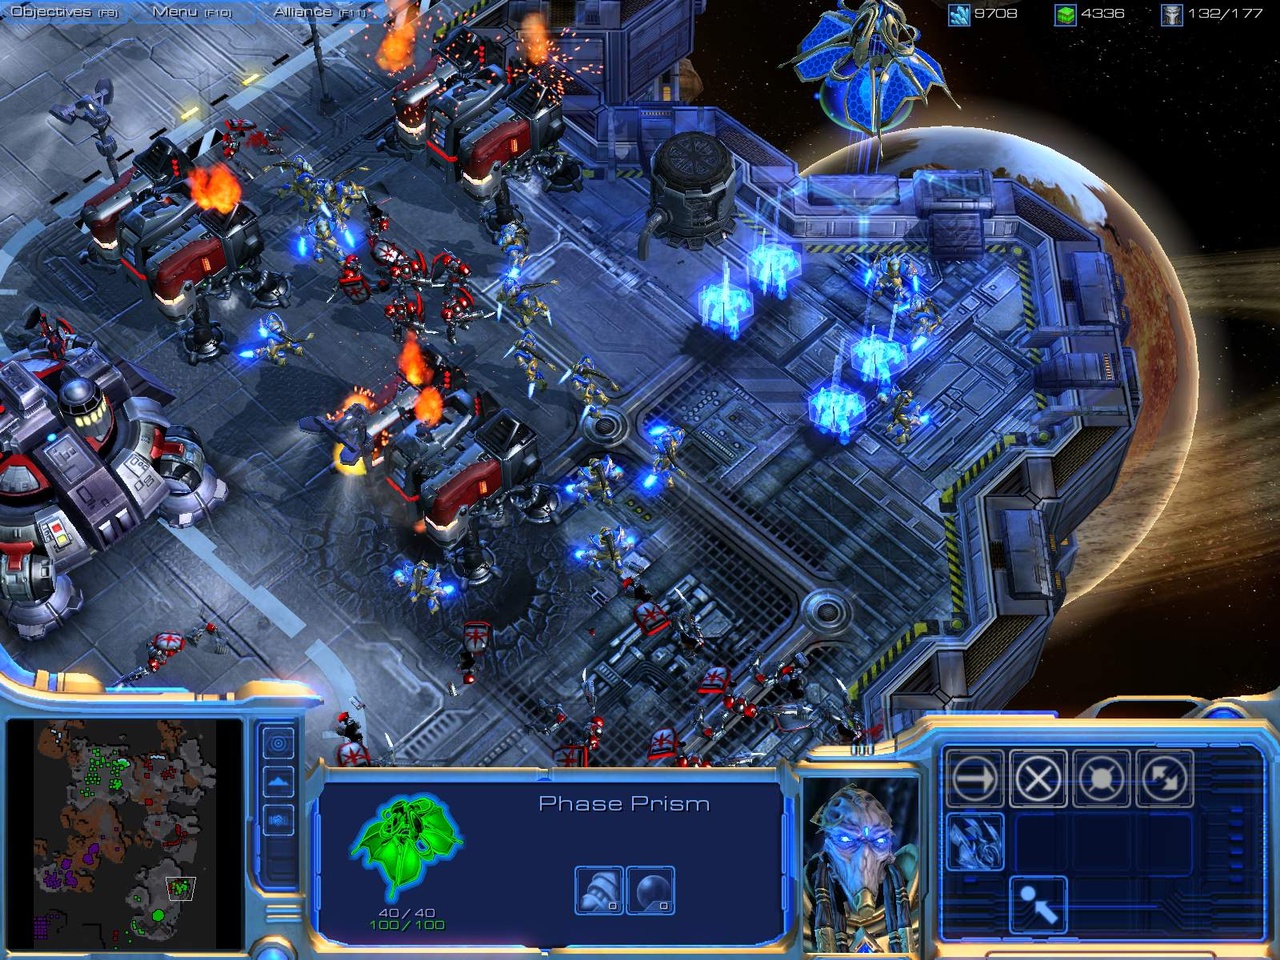 The protoss' warp-in ability makes them much less predictable...but the terrans and zerg will have new tricks up their sleeves too.